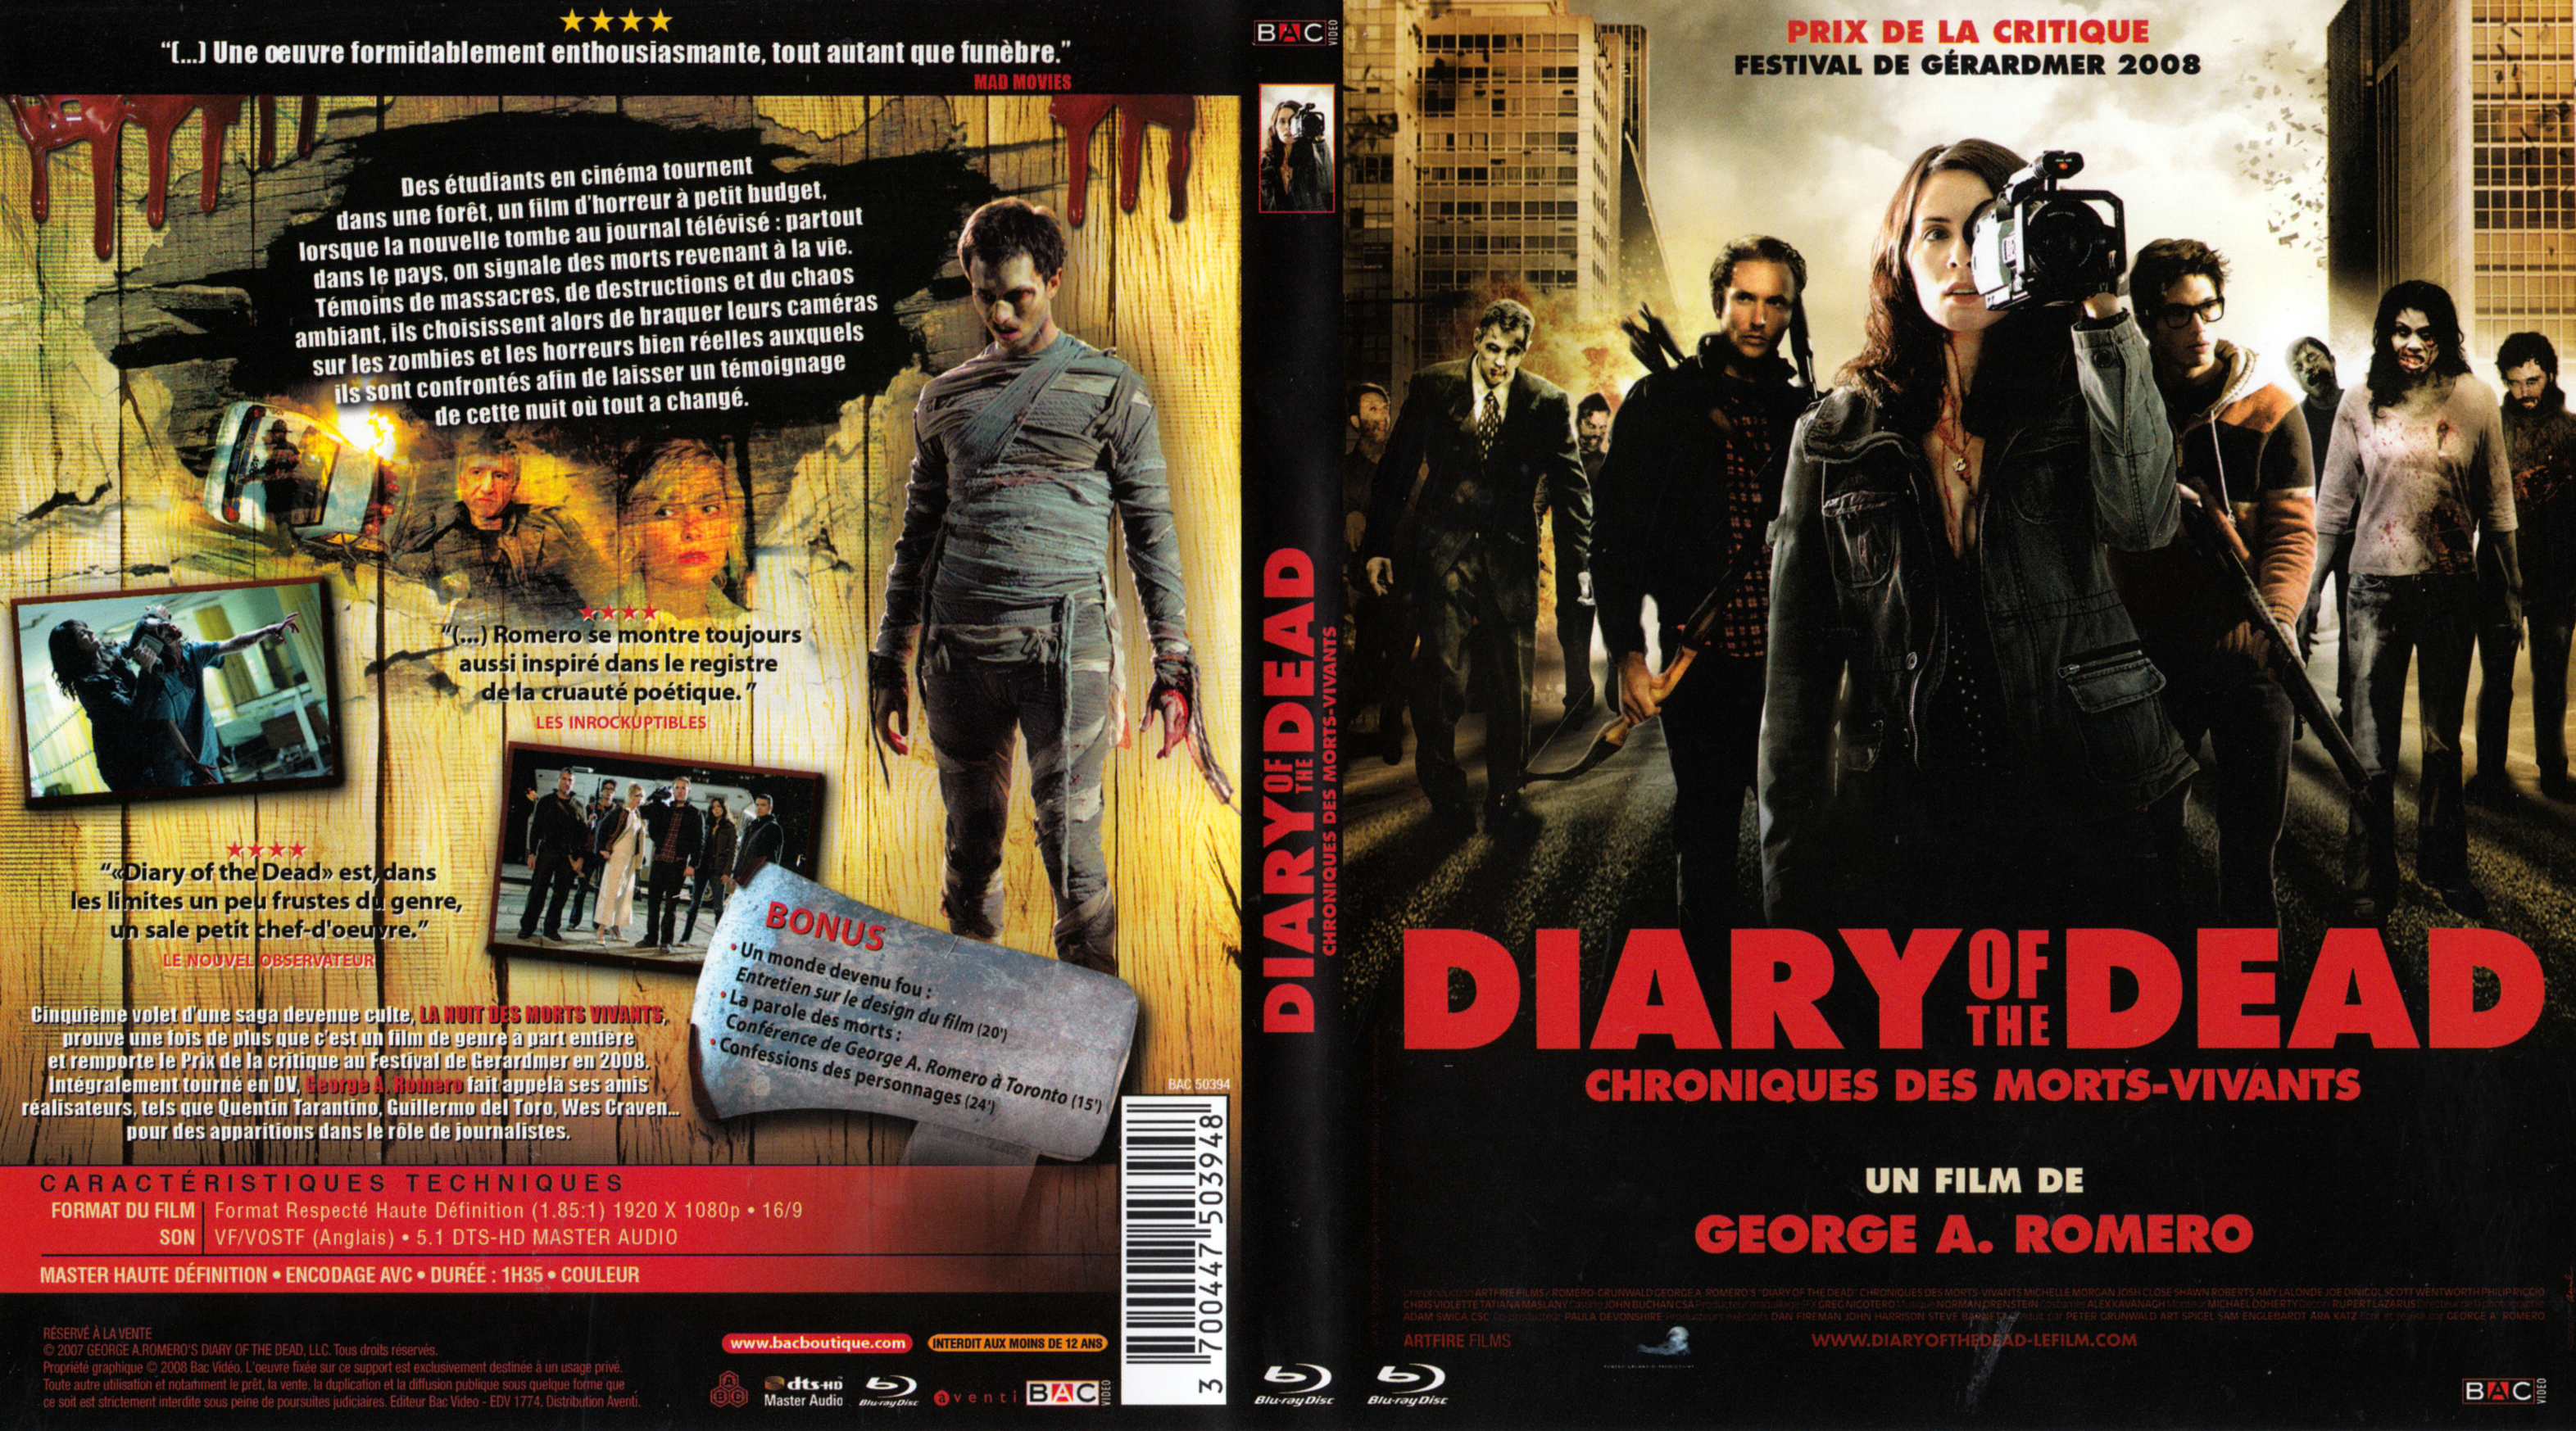 Jaquette DVD Diary of the Dead (BLU-RAY)